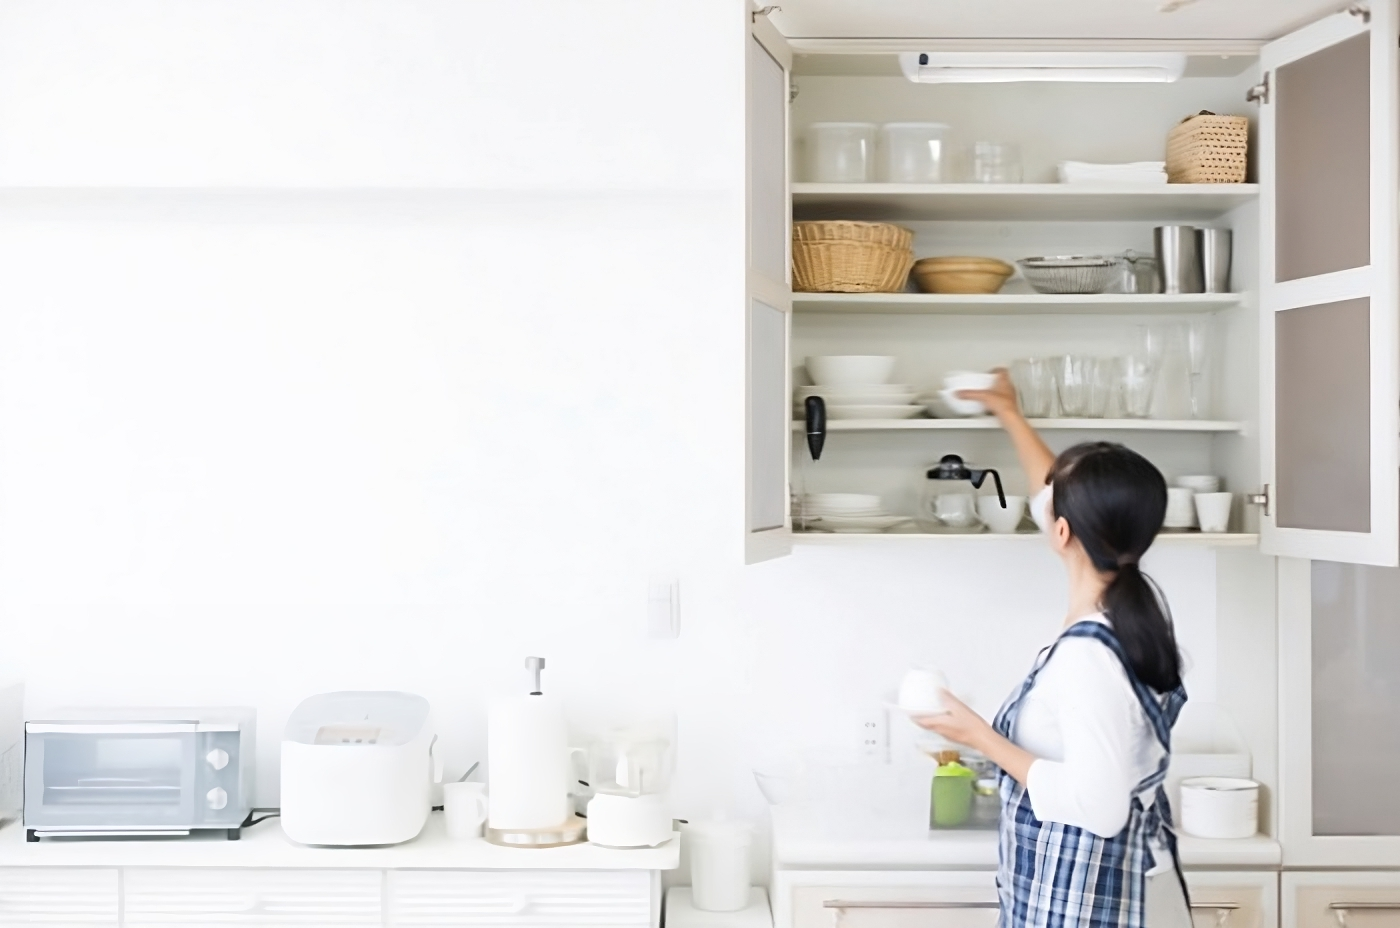 Image of Streamline striplight in a kitchen cupboard, a lady is reaching up to the cupboard to grab bowls, the automatic door switch turns the light on.